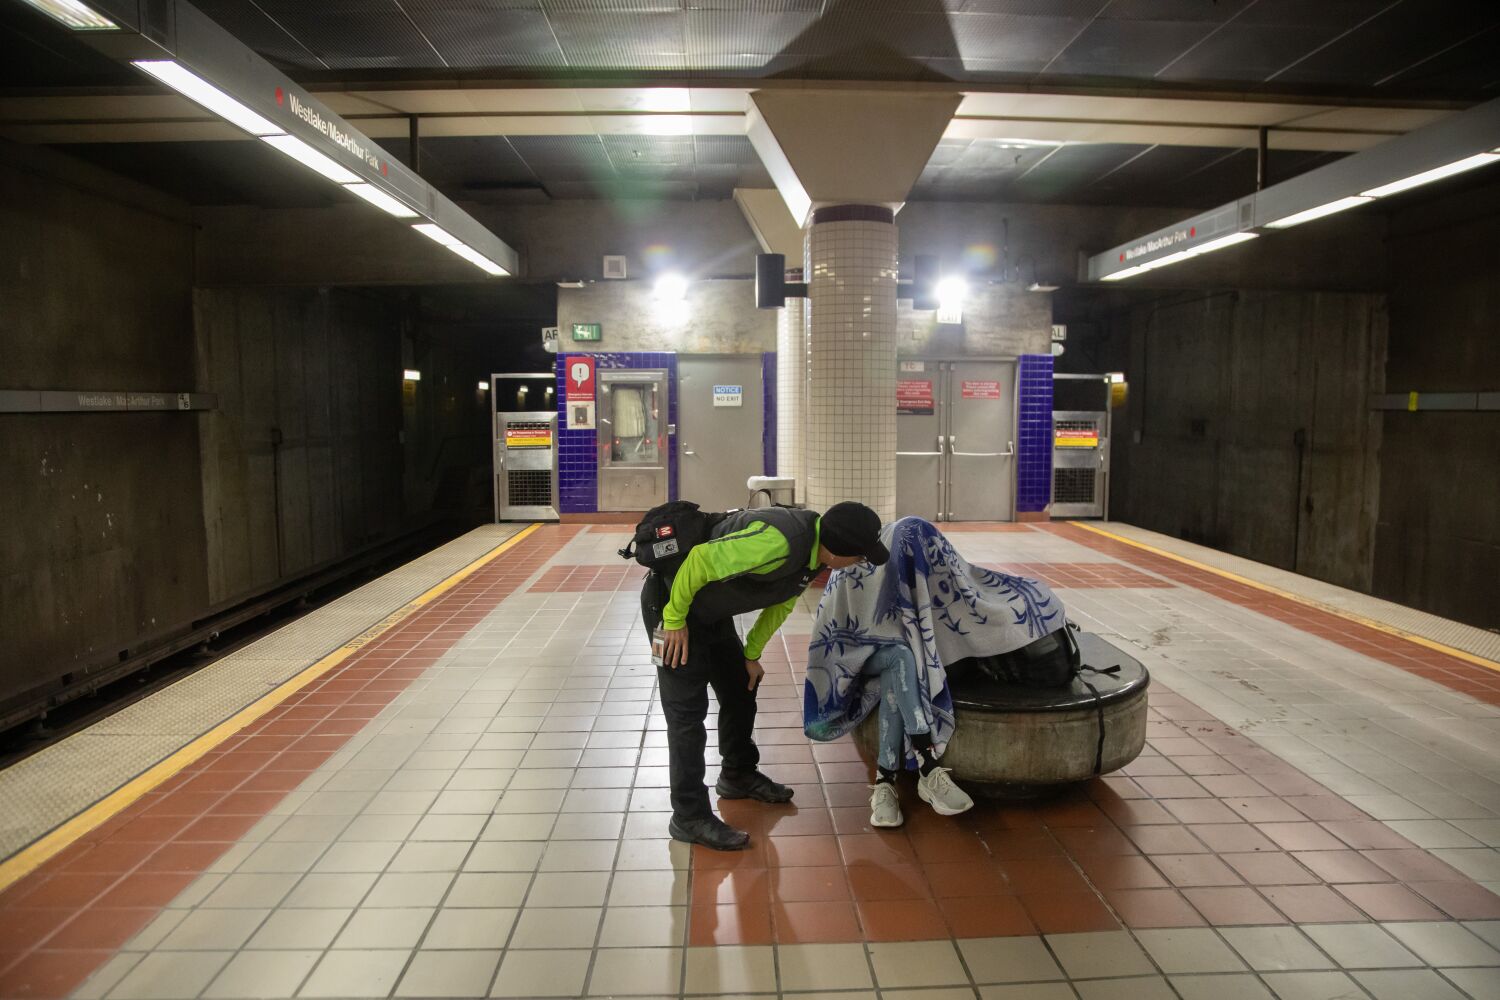 One Metro worker revived 21 riders overdosing on opioids. He's not alone